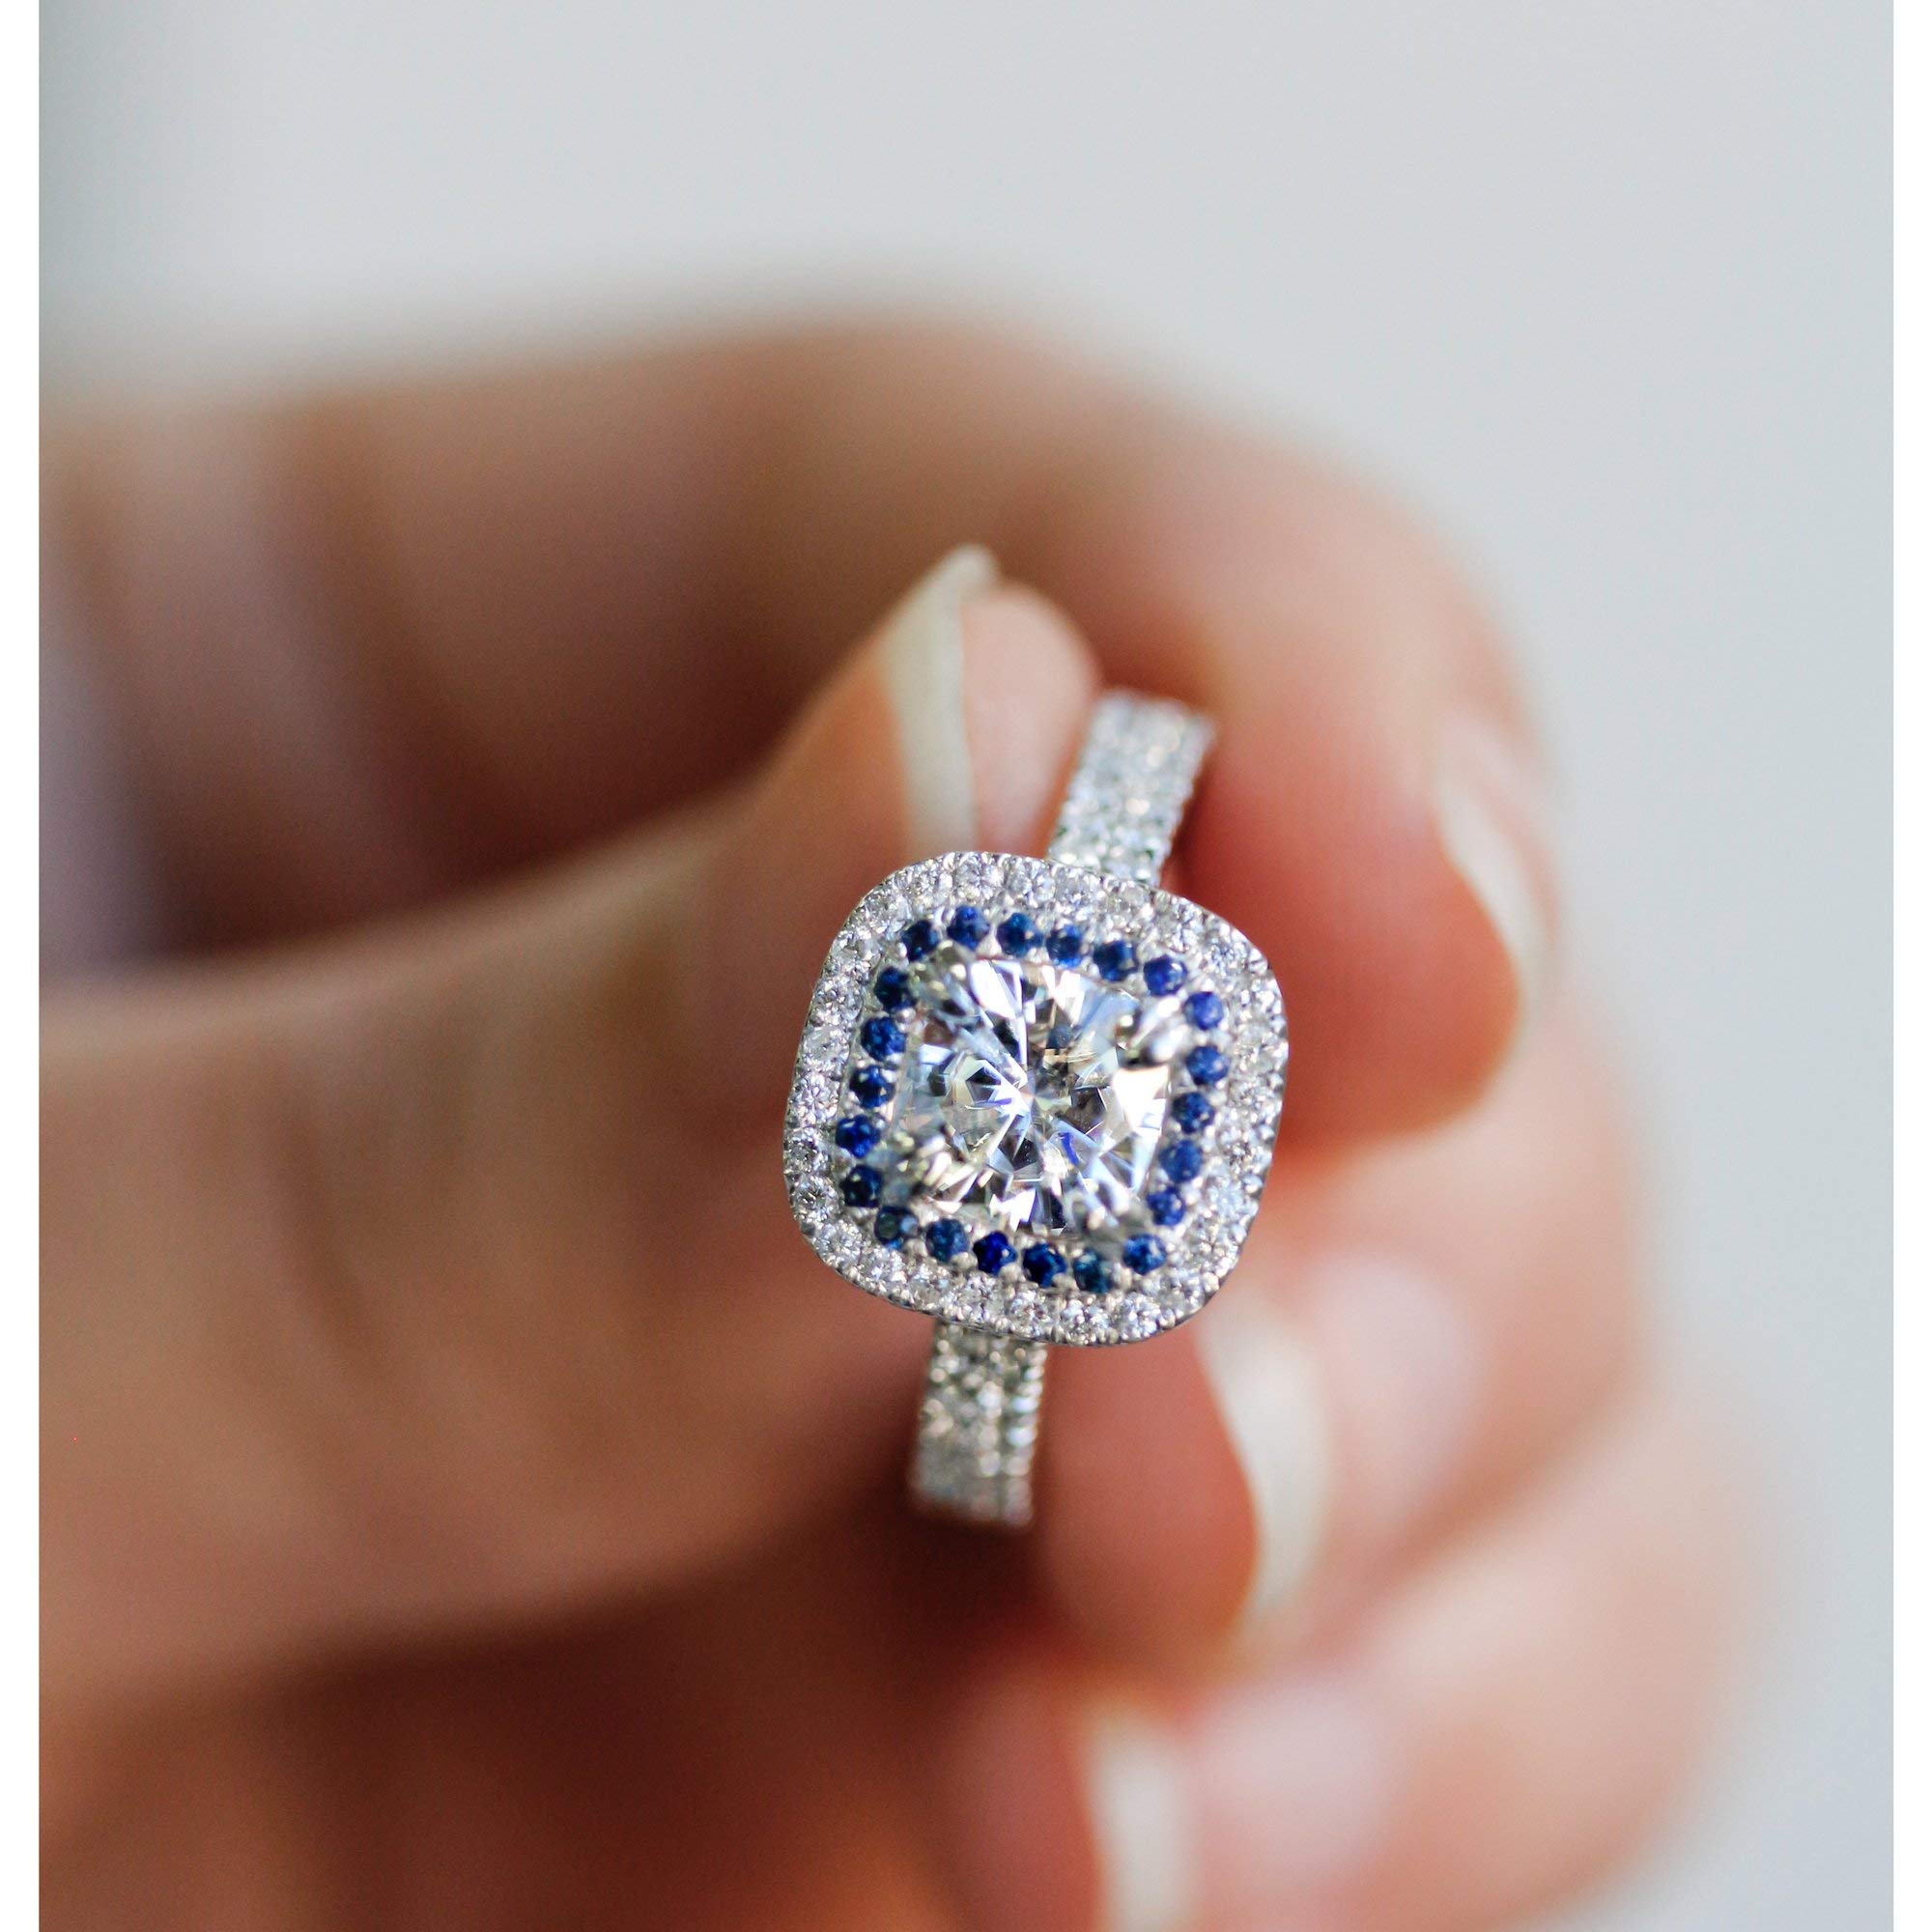 Kobelli 2 Carat TW Moissanite (GH) and Sapphire Cushion Halo Engagement Ring in 14k White Gold